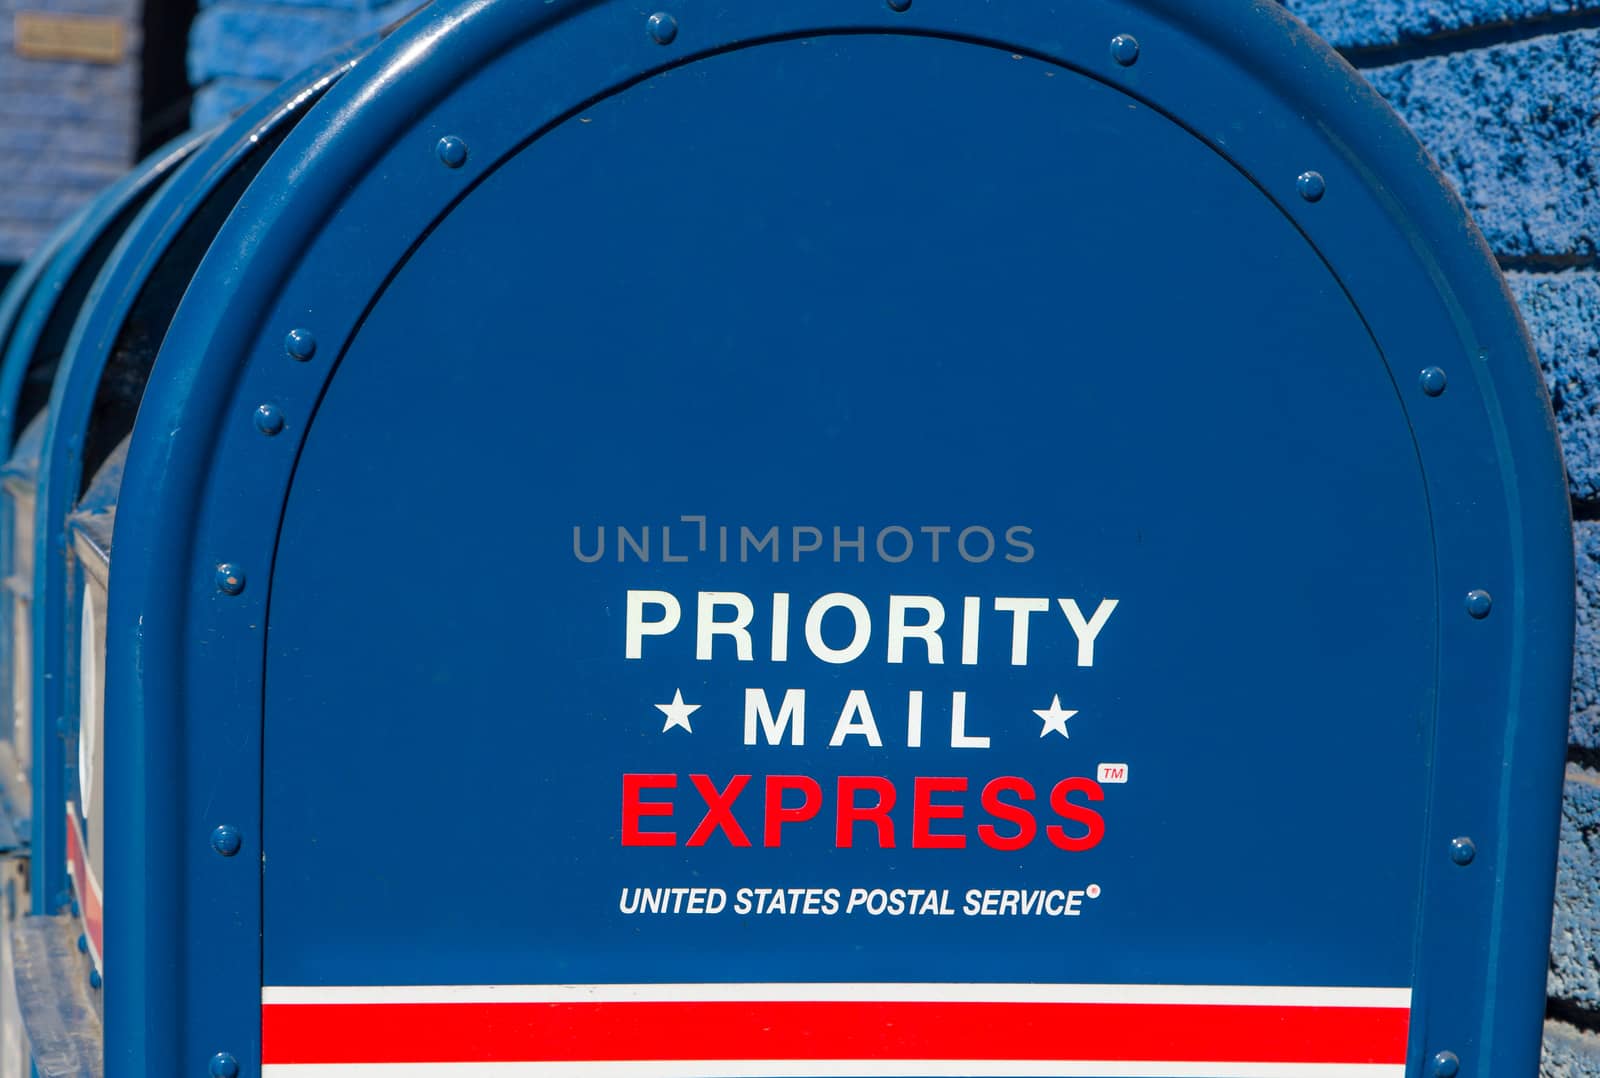 LOS ANGELES, CA/USA - NOVEMBER 8, 2015: Priority Mail Express mailbox. Priority Mail Express is a service of the United States Postal Service.